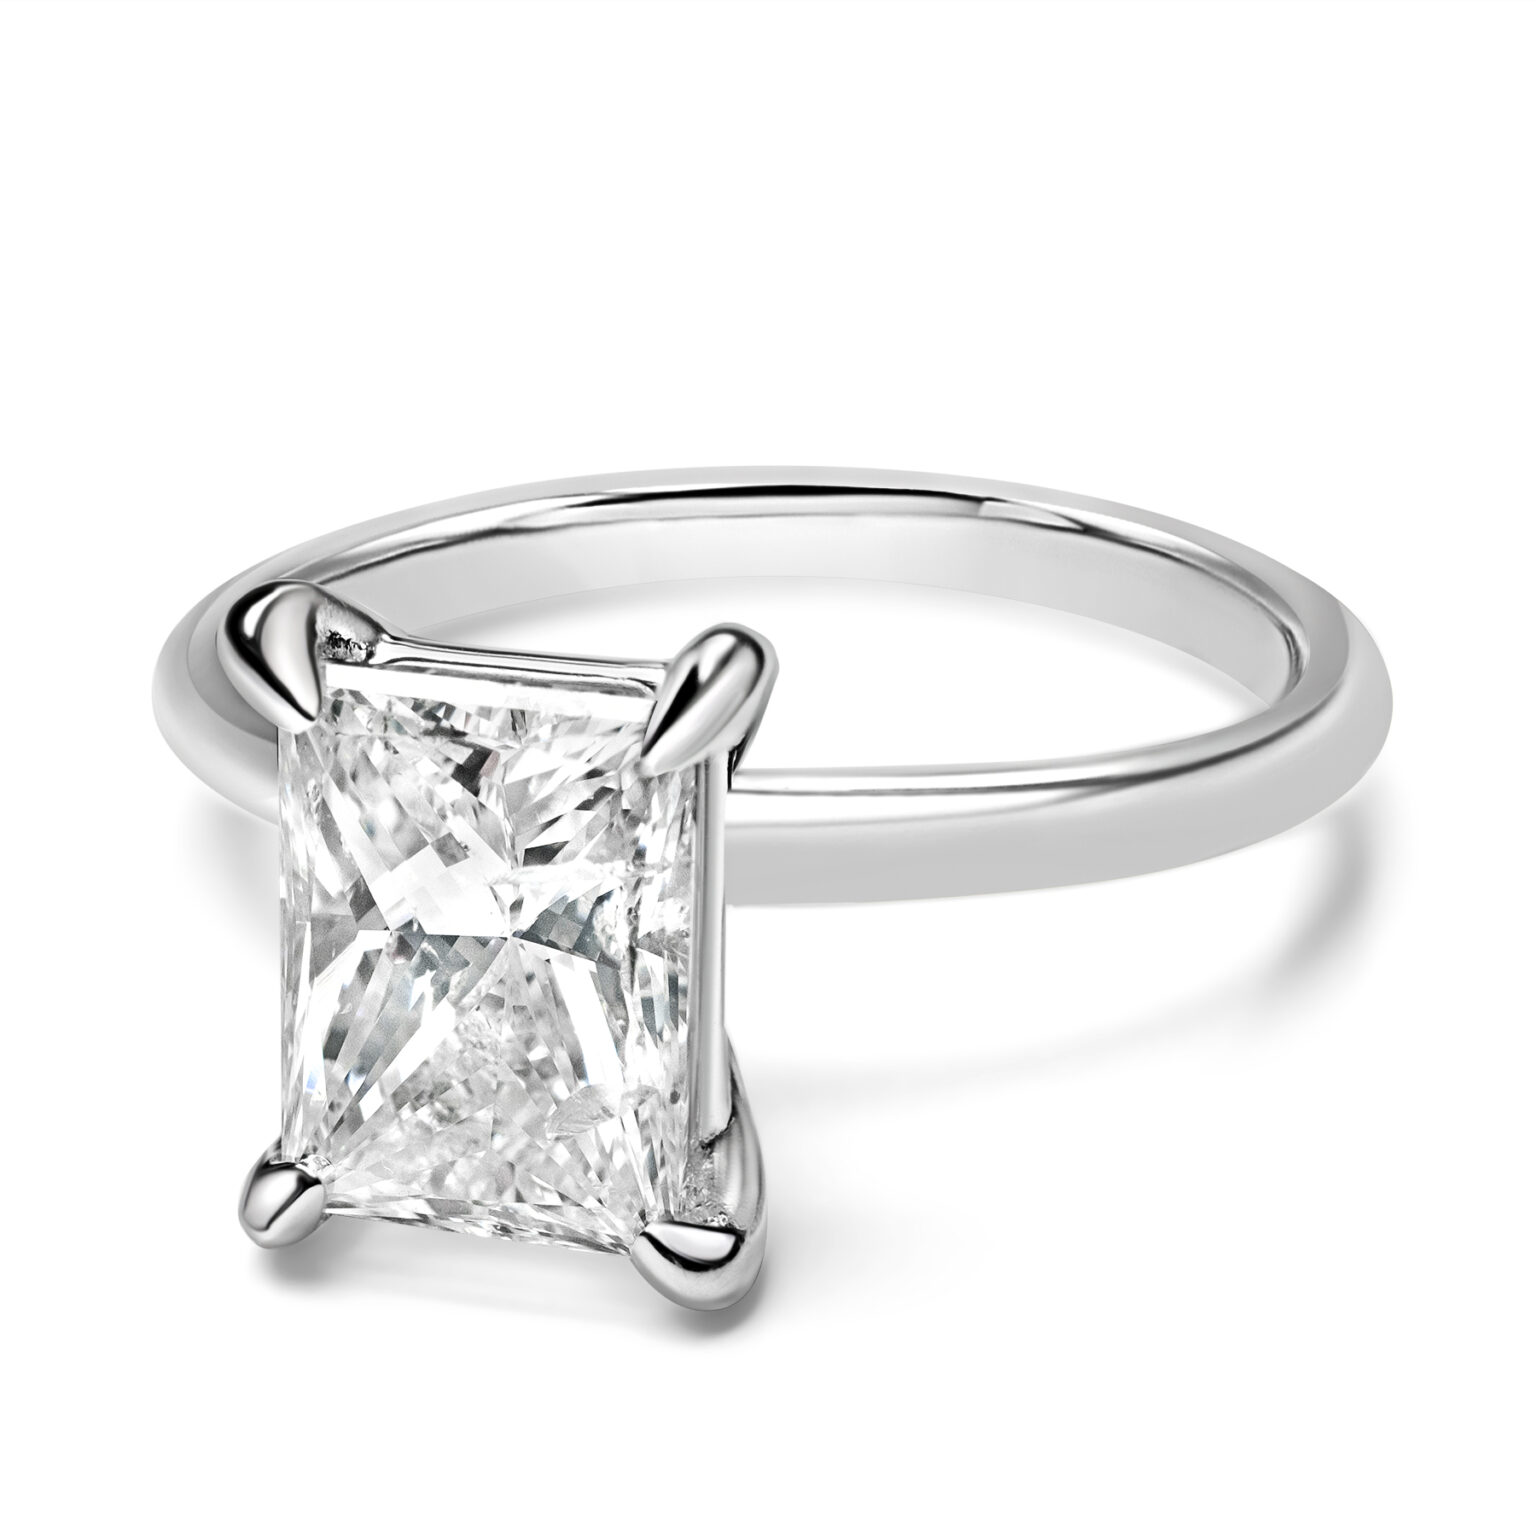 Radiant Cut Diamond Engagement Ring in White Gold | Adamas Fine Jewelry